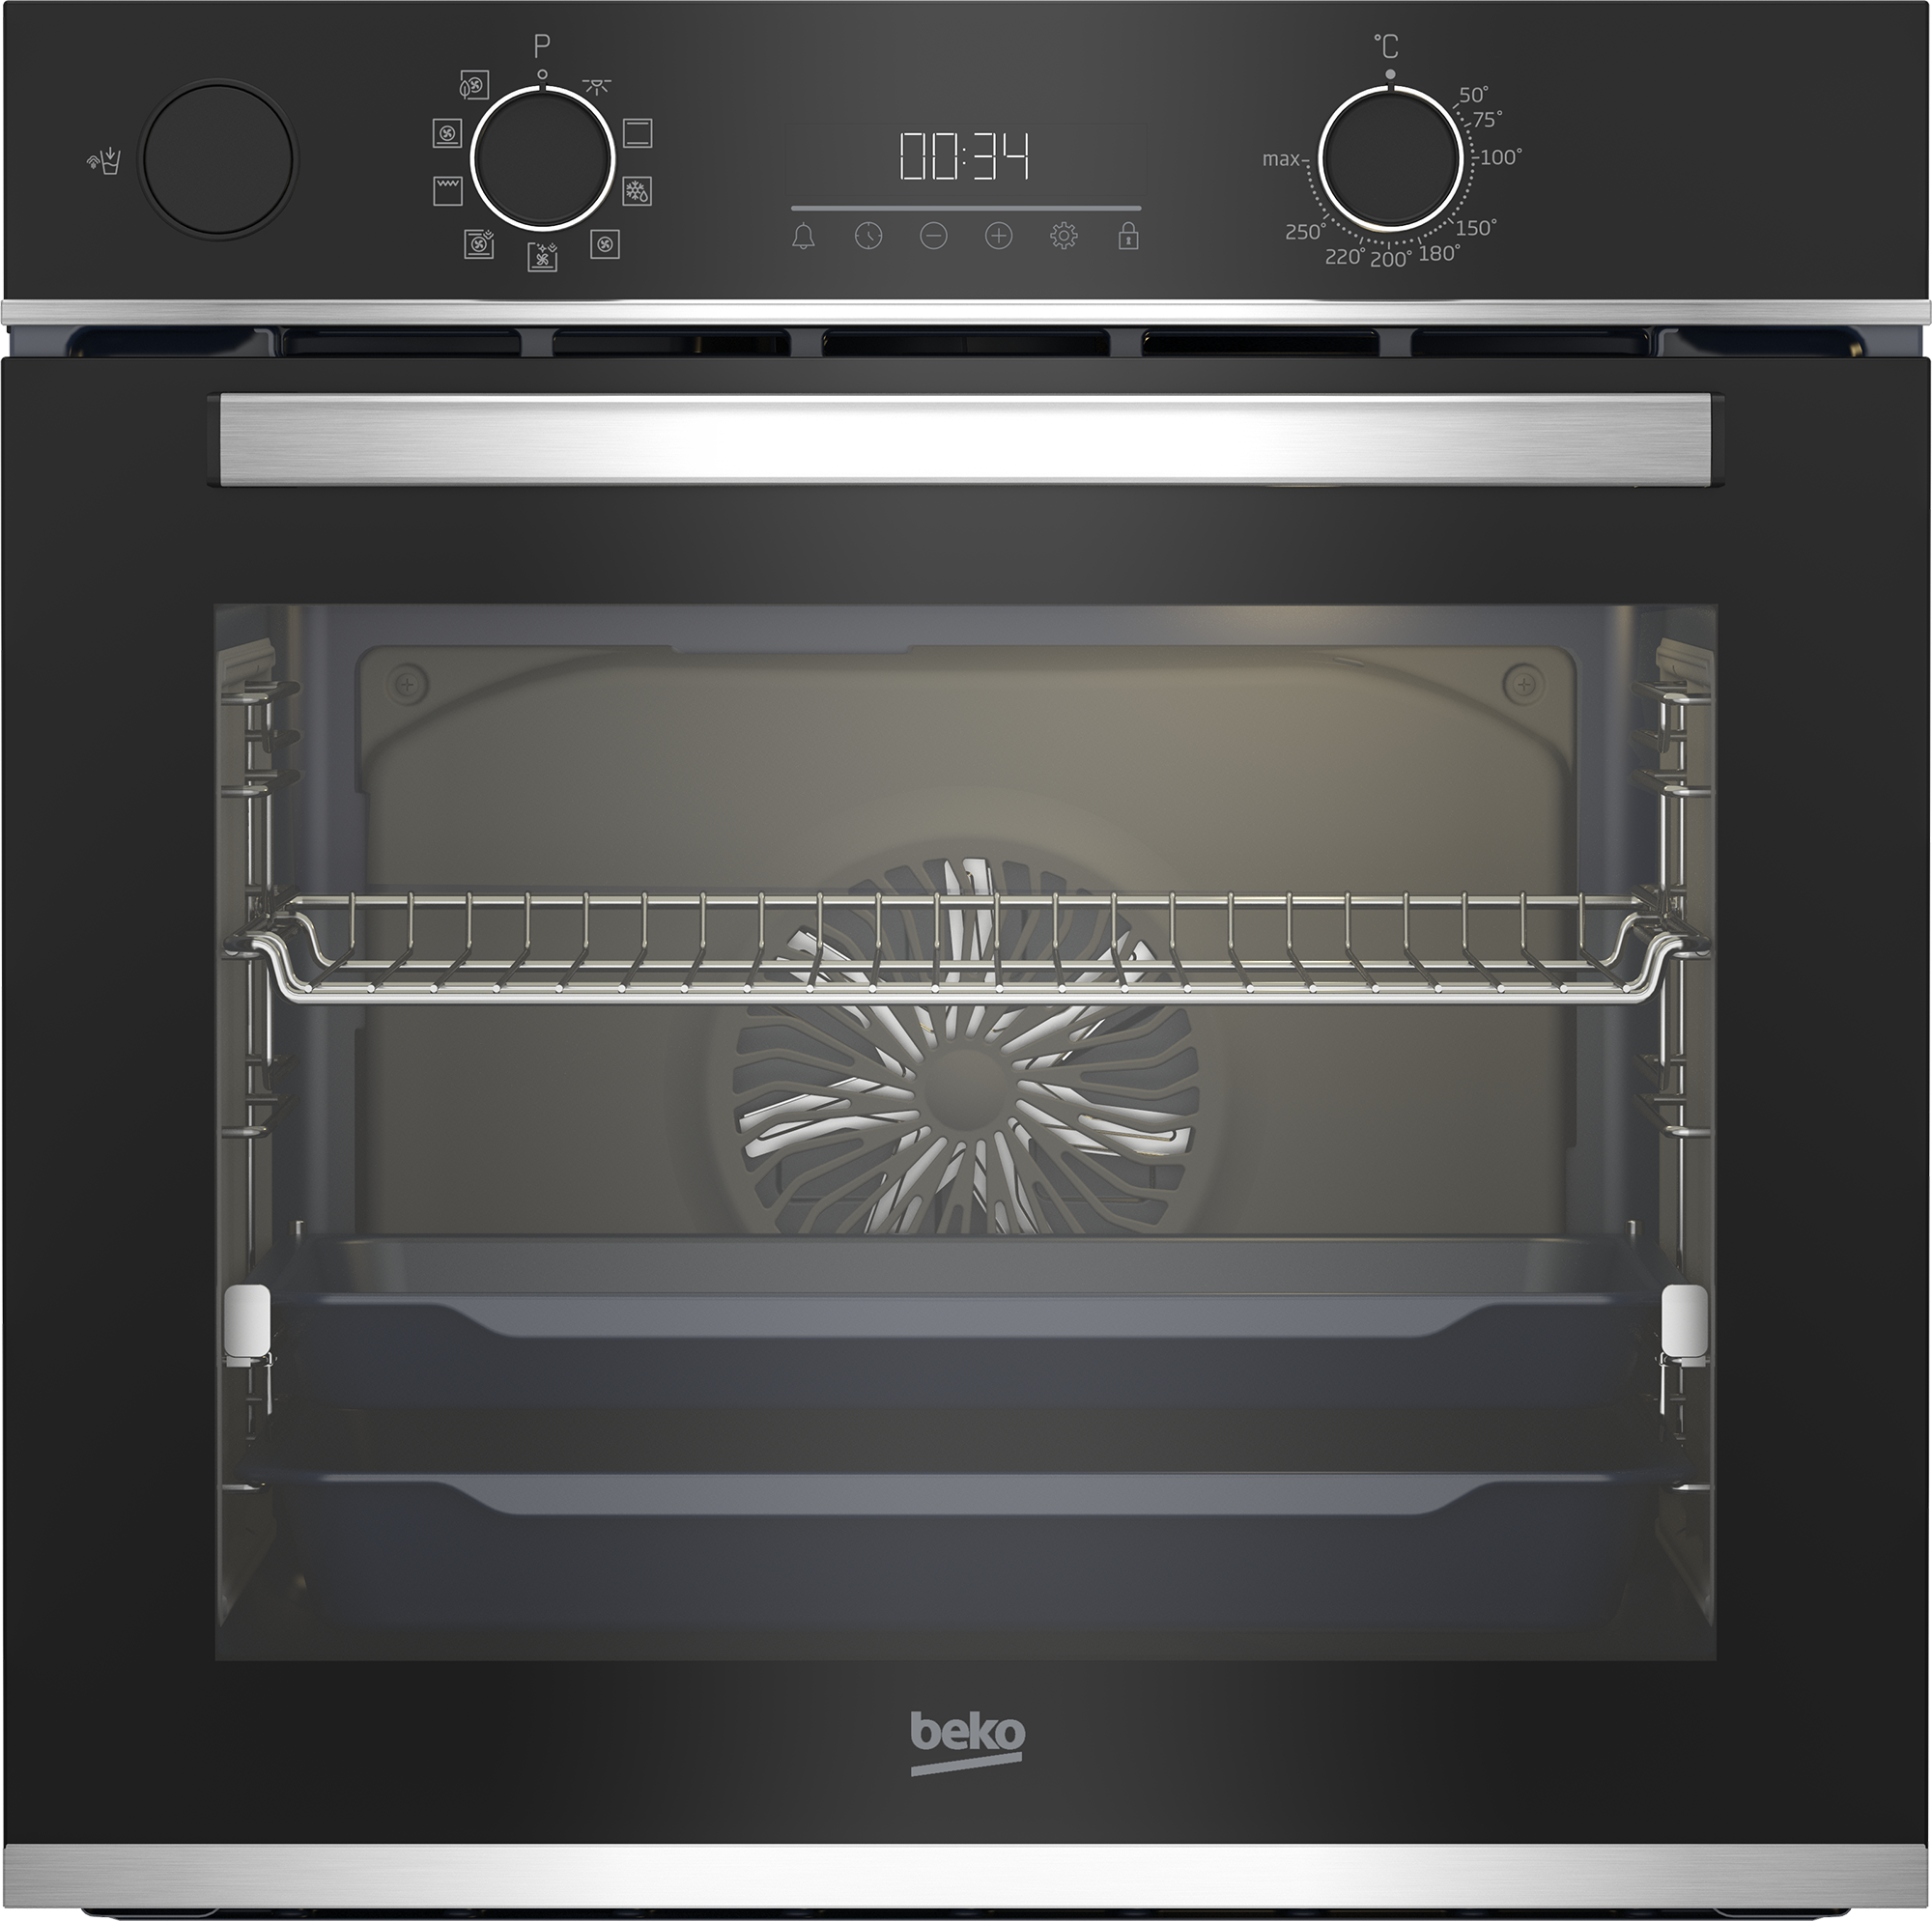 Oven image